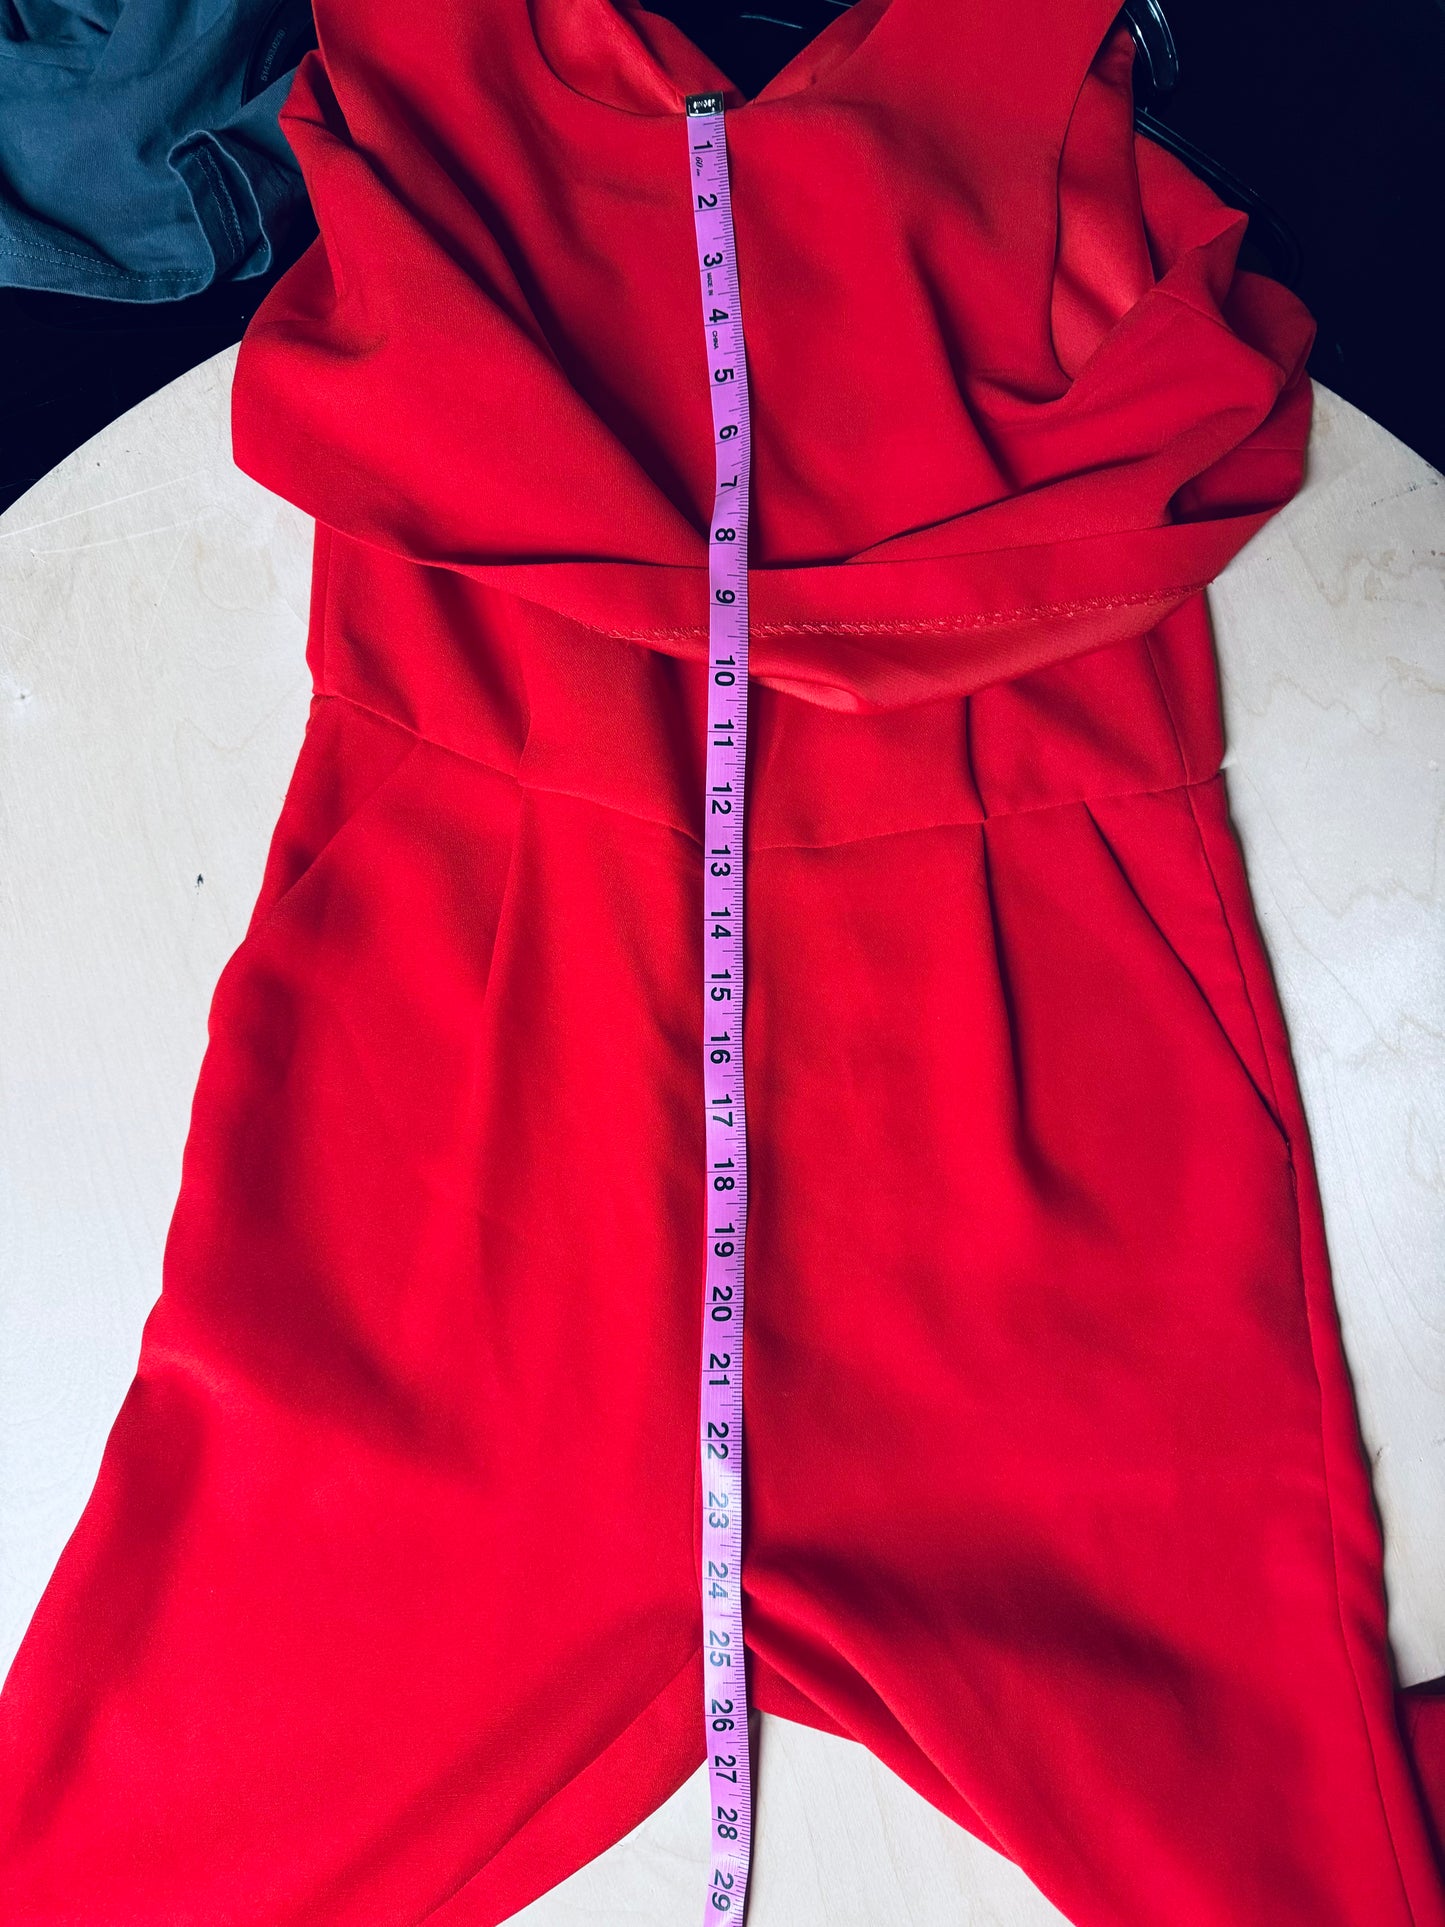 Just Female Women’s Jumpsuit Sleeveless Red - Size Small